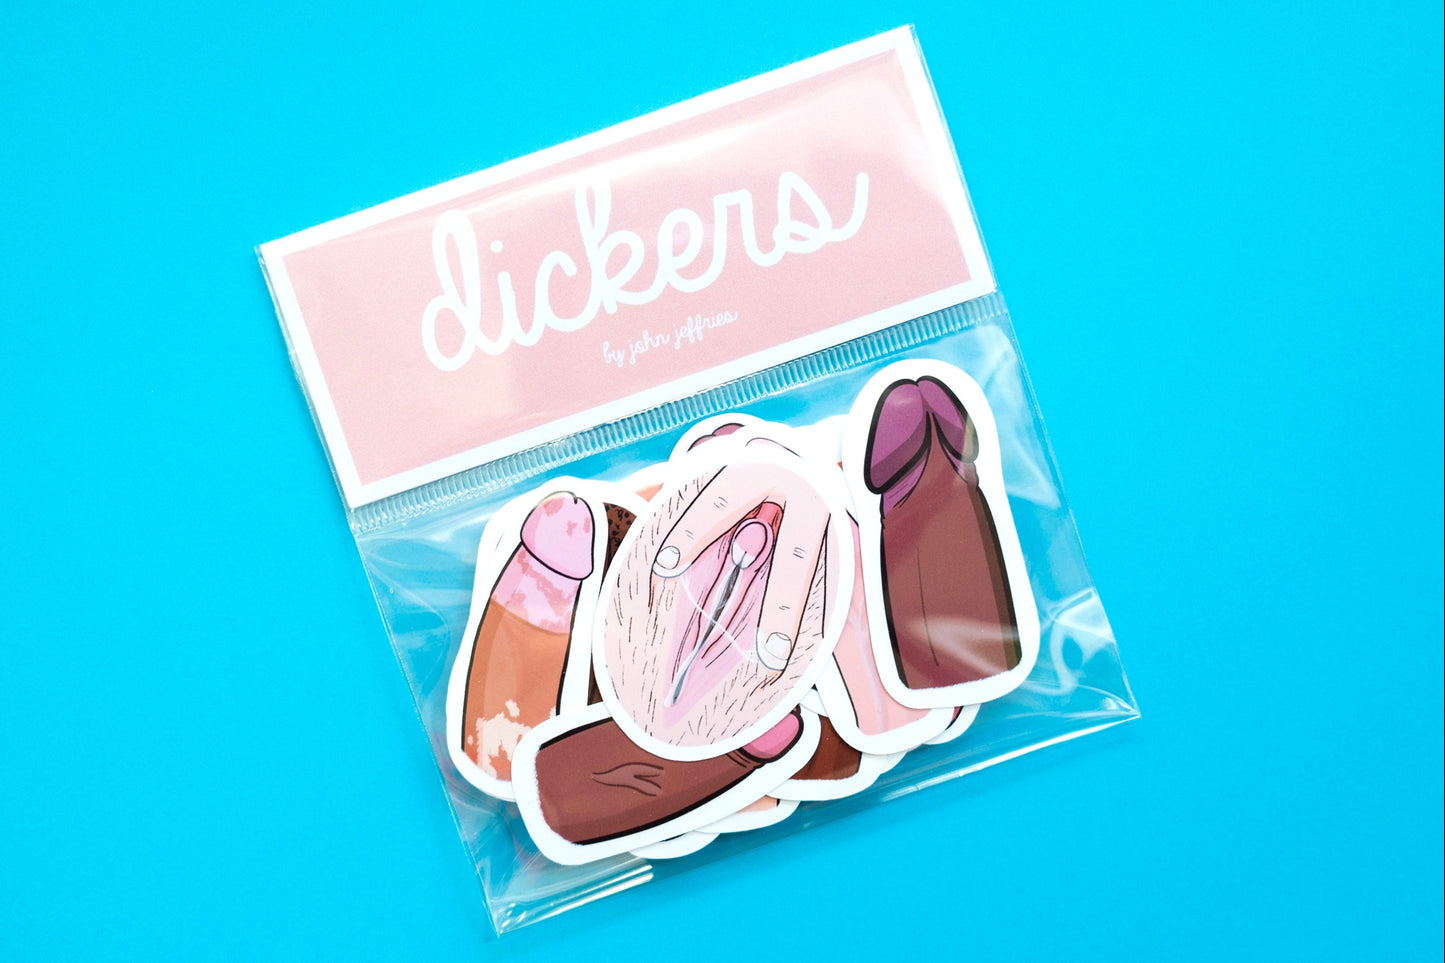 Dick Stickers - Dickers: Volume Four (25 Stickers) Penis Stickers, Cock Stickers